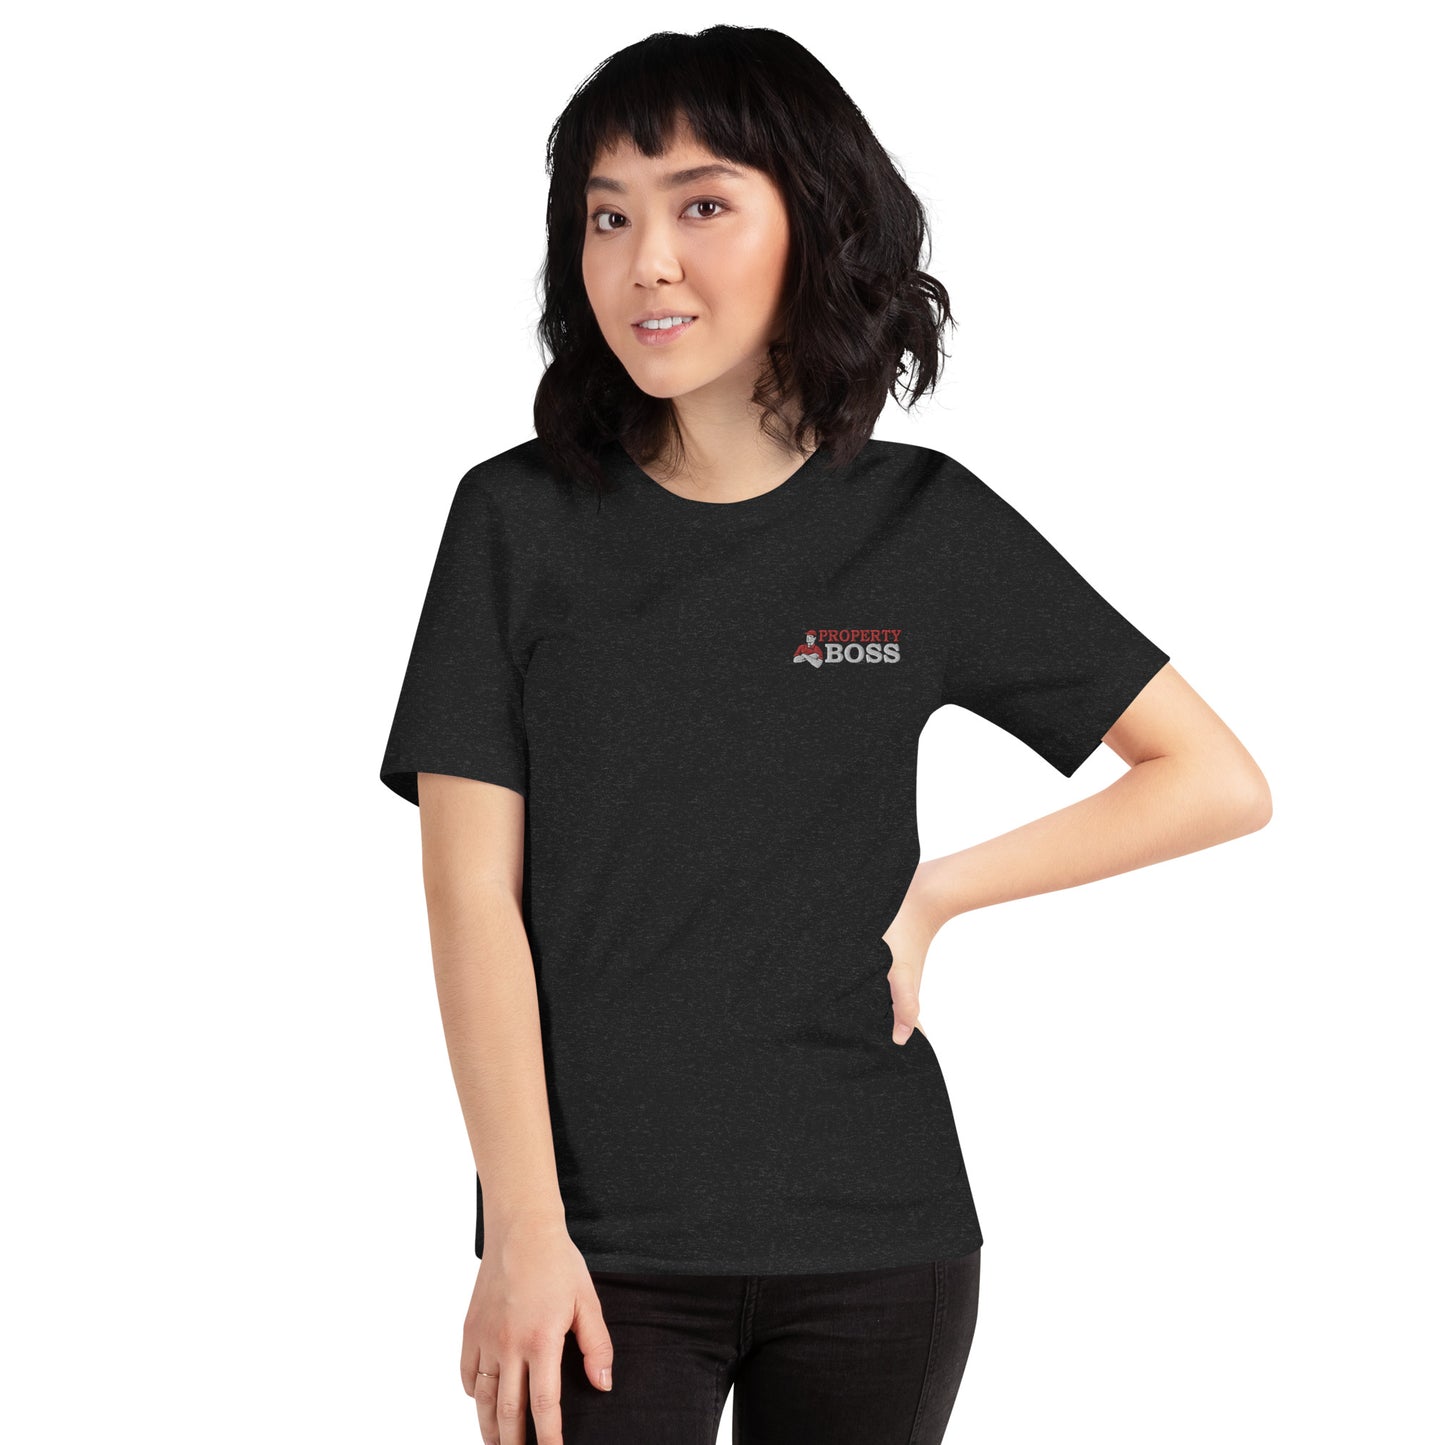 Unisex embroidered t-shirt